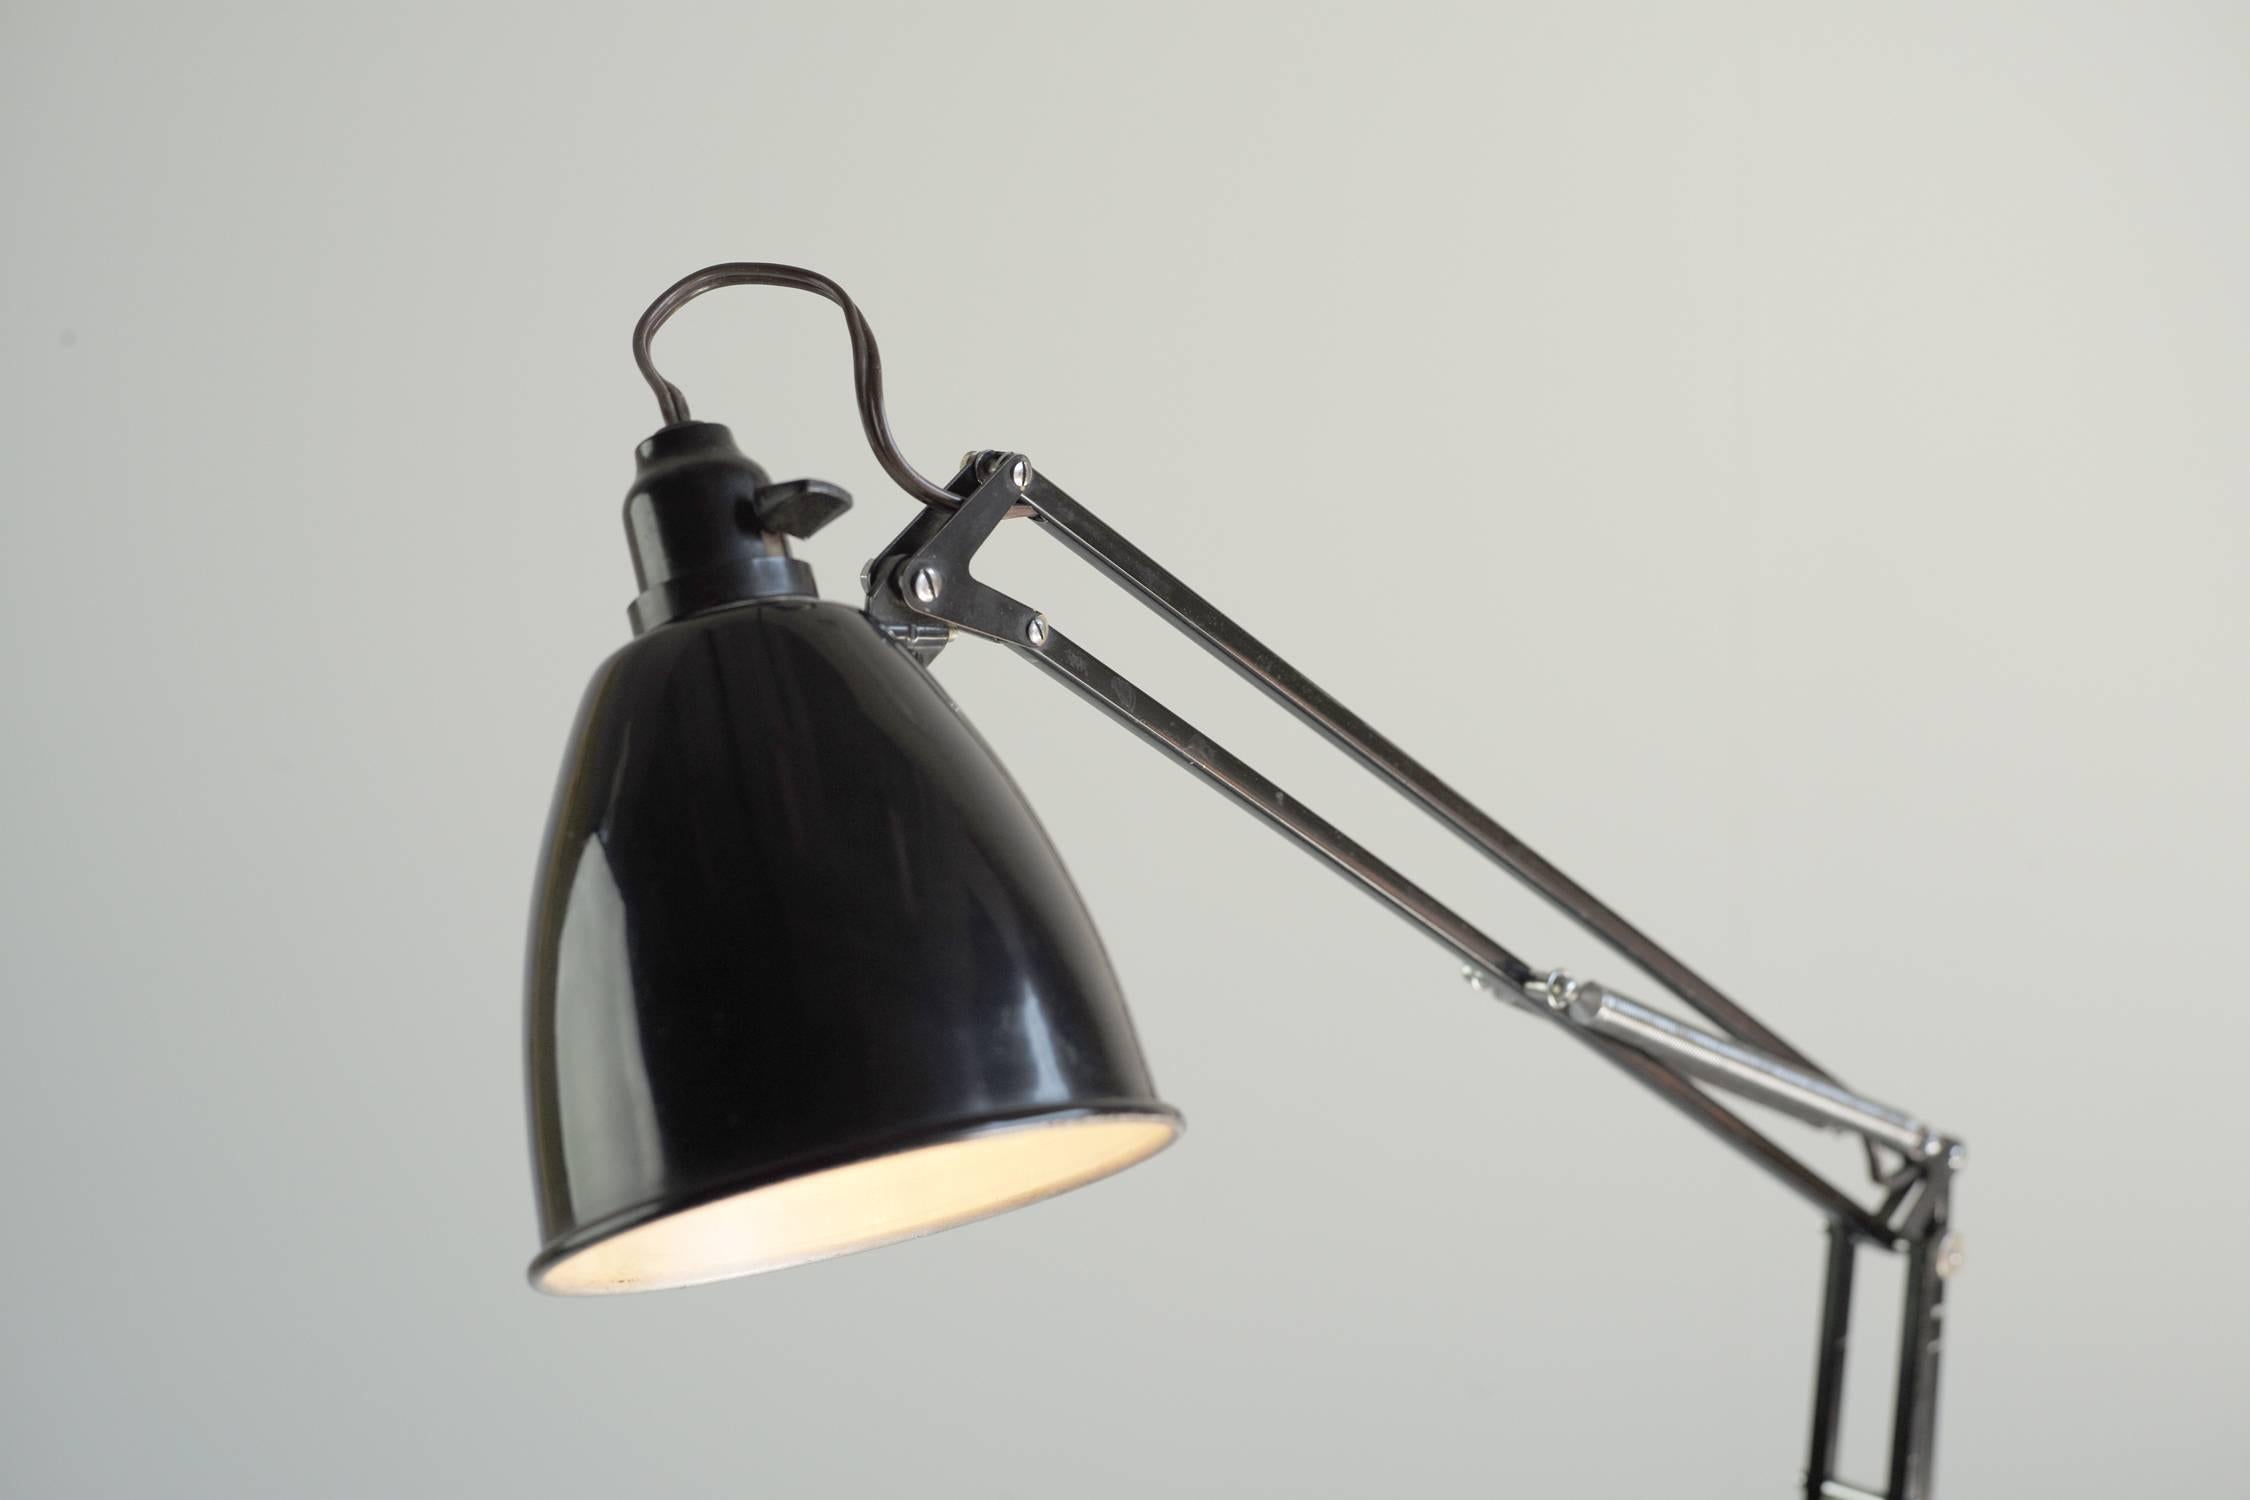 This vintage Anglepoise table lamp was designed by Georges Cawardine for Terry and Sons and features a Hermès green leather saddle stitched onto the base of the lamp. The design is inspired by the form of the human arm and this lamp is in a very